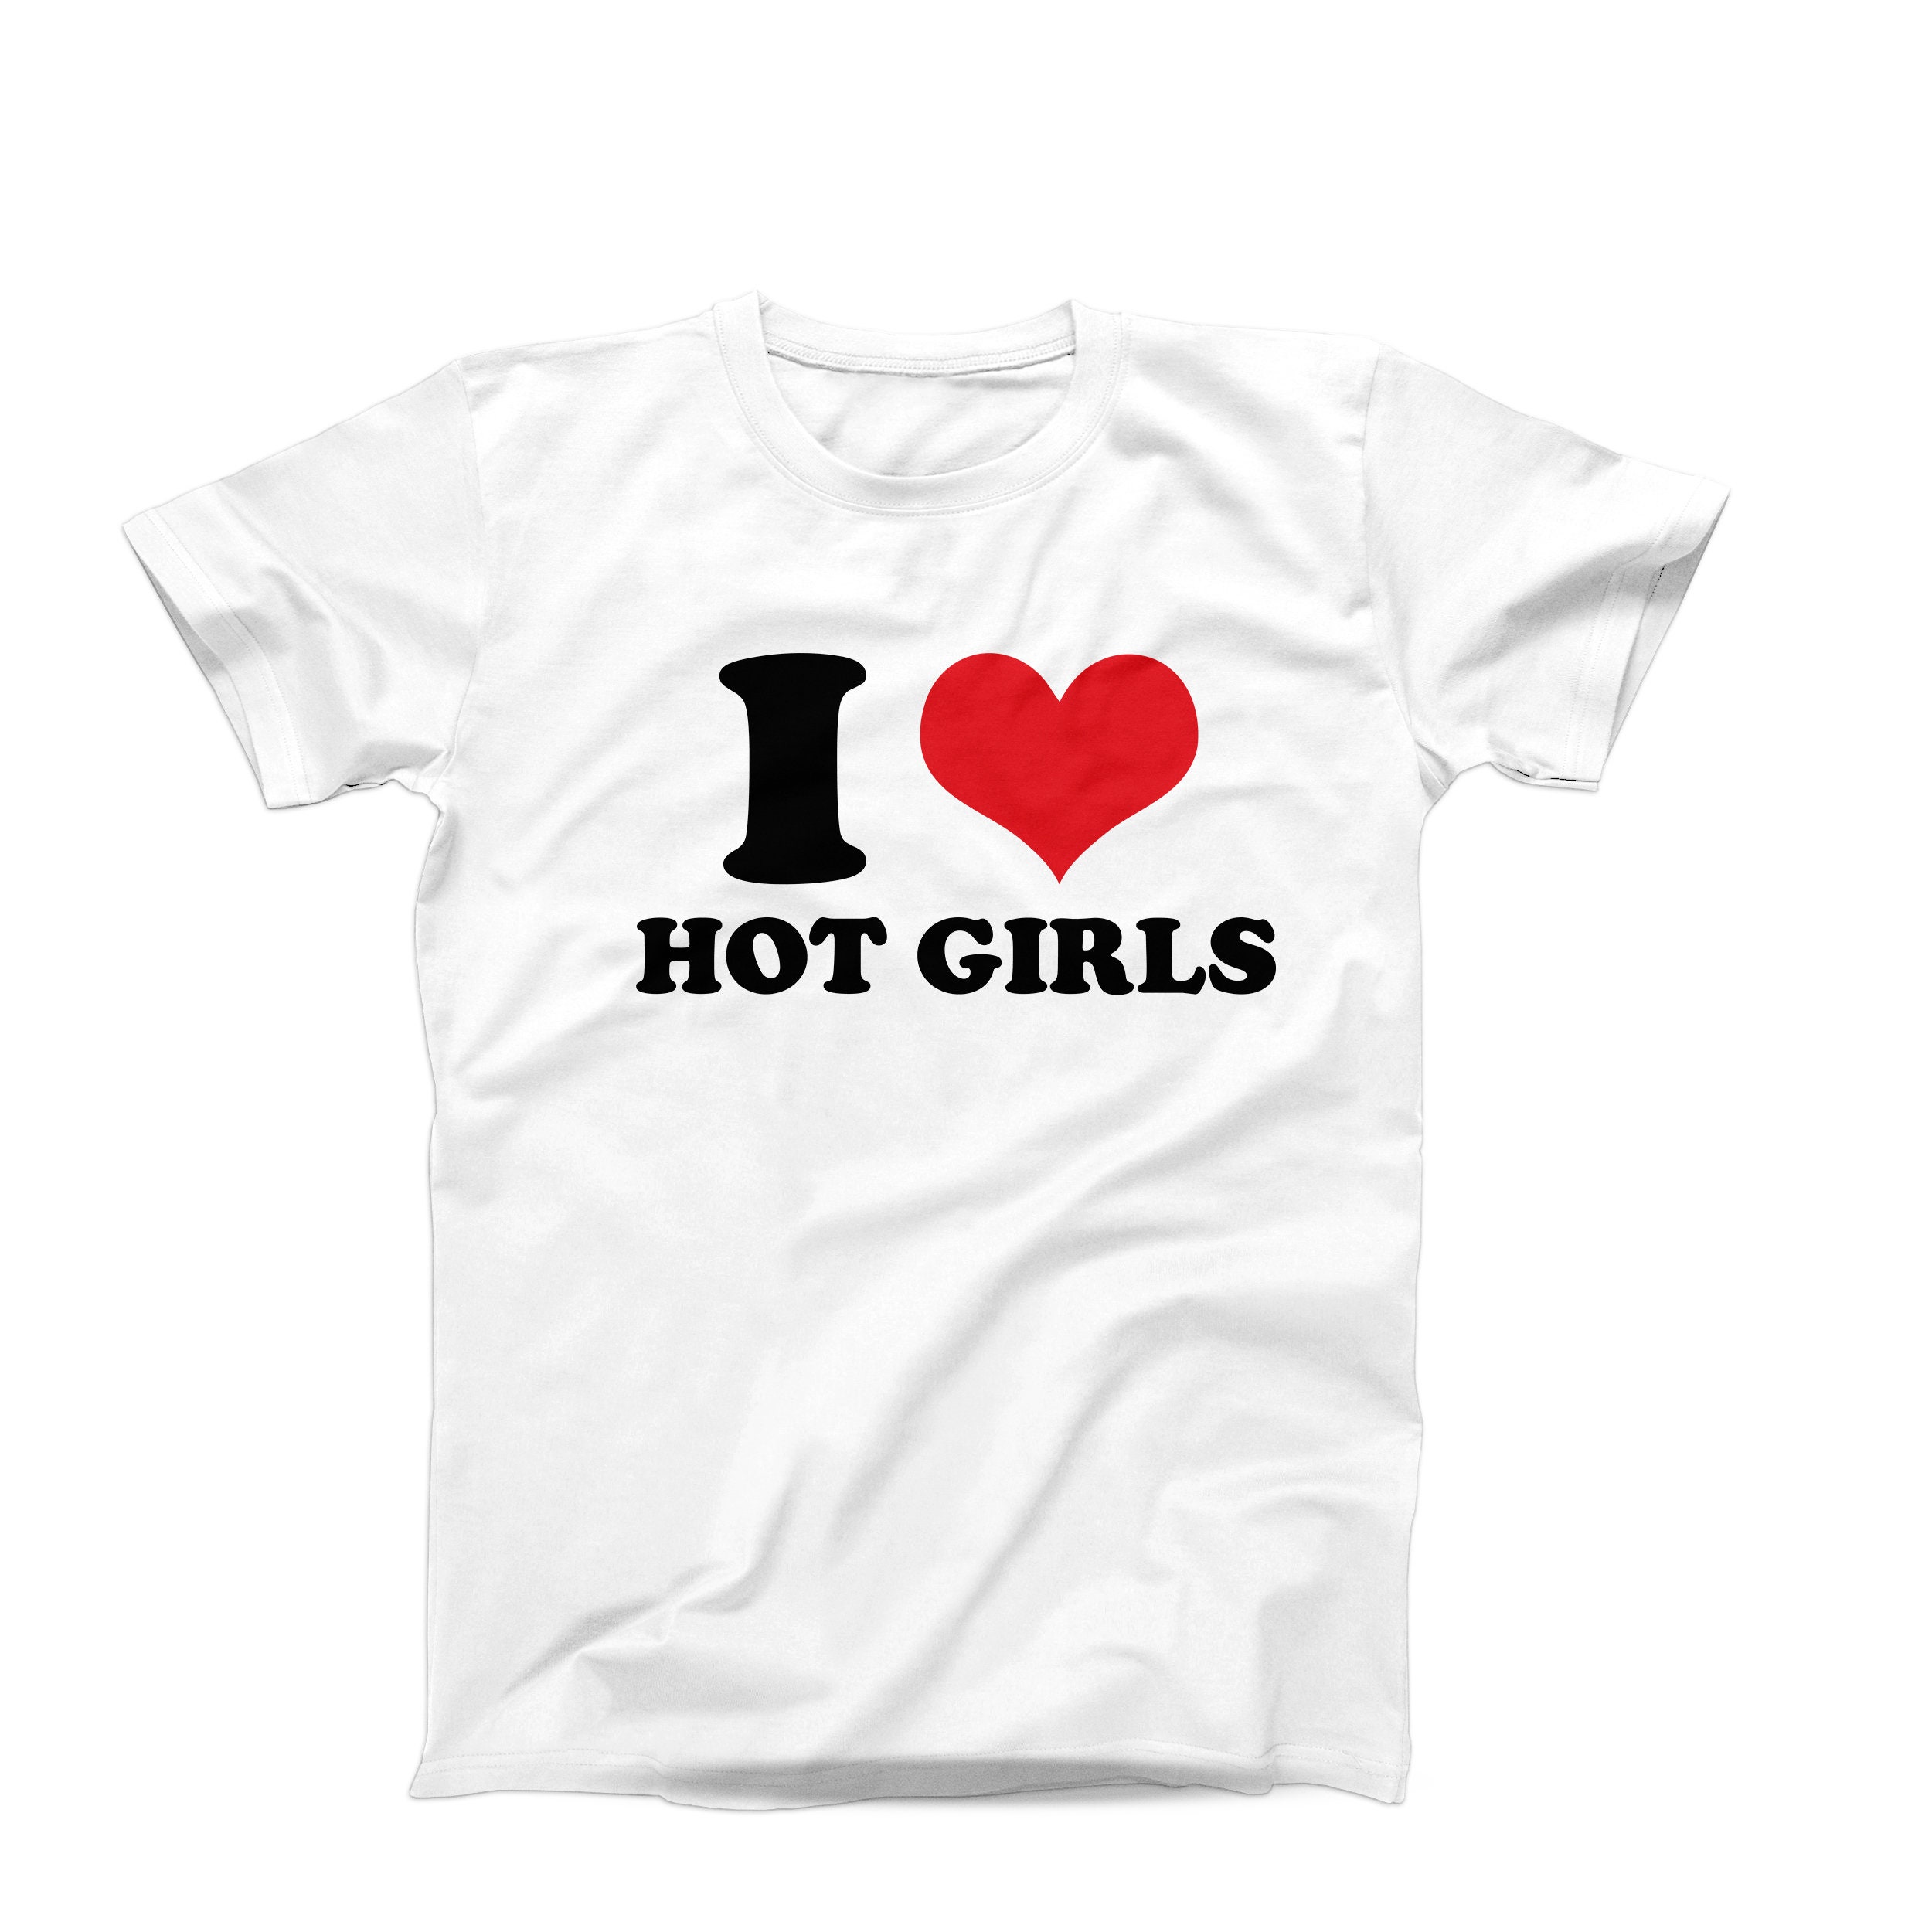 christy stroup recommends i love hot chicks pic